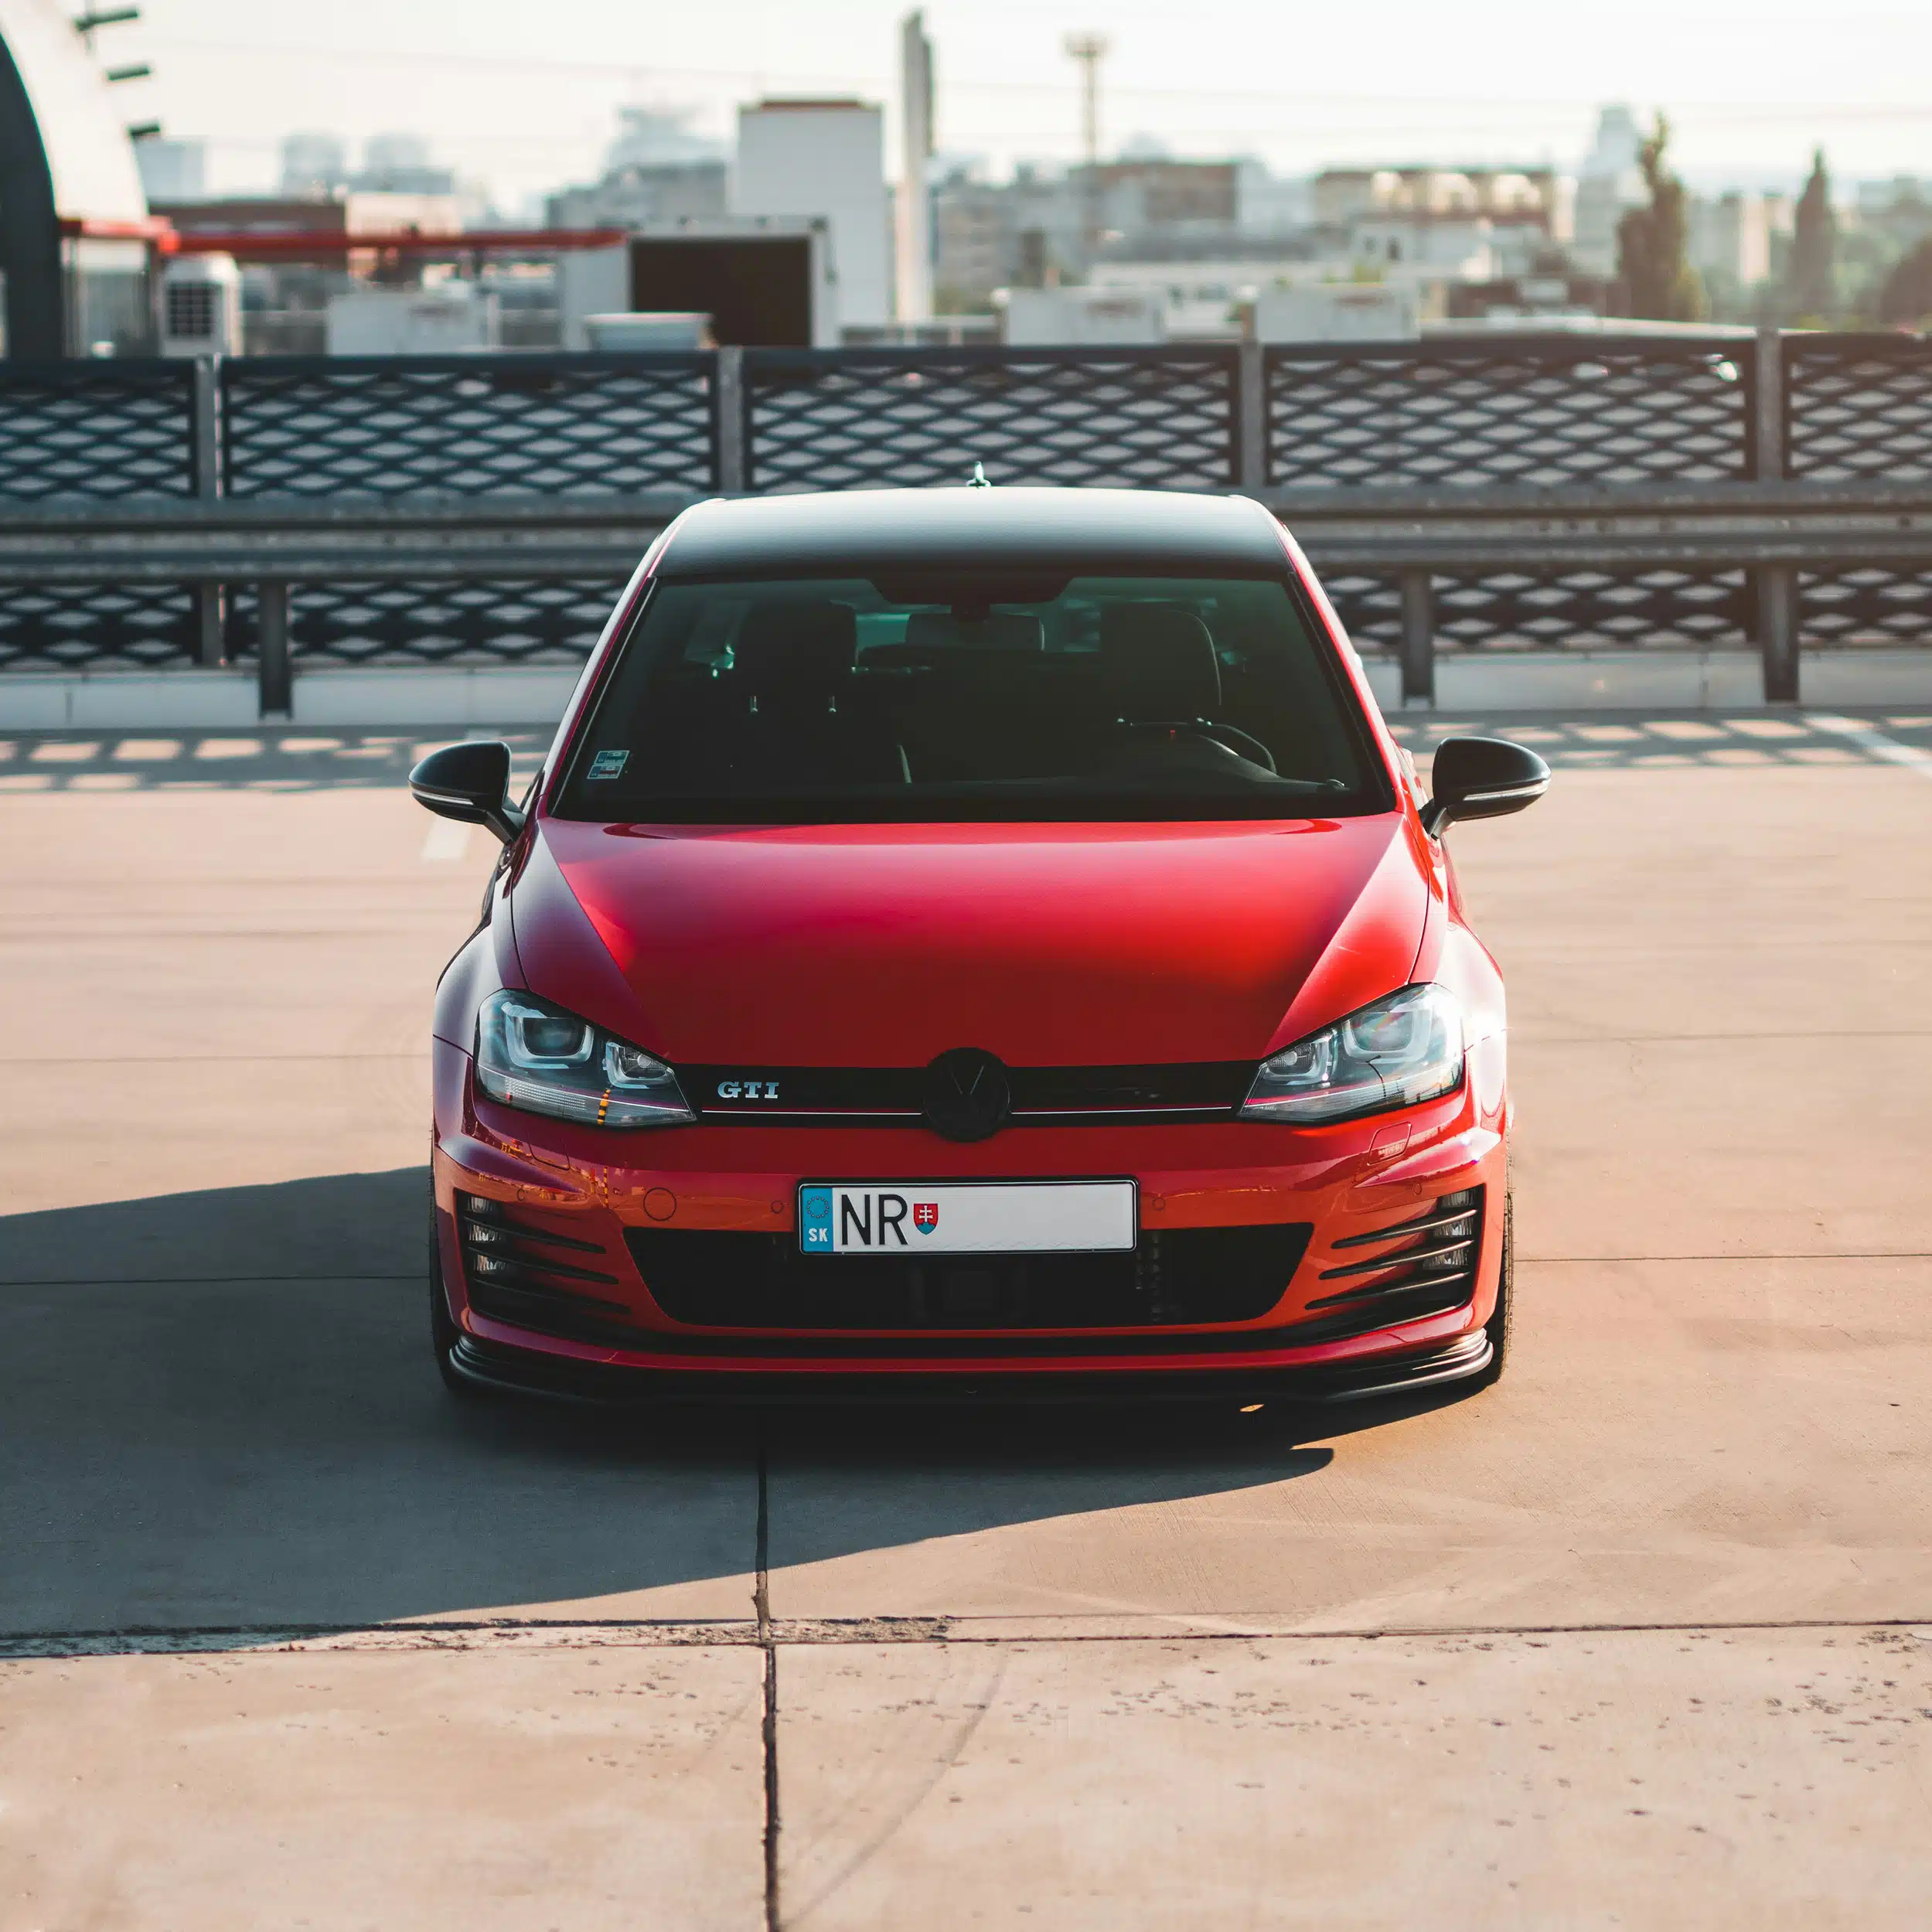 Lowered red VW Golf GTI